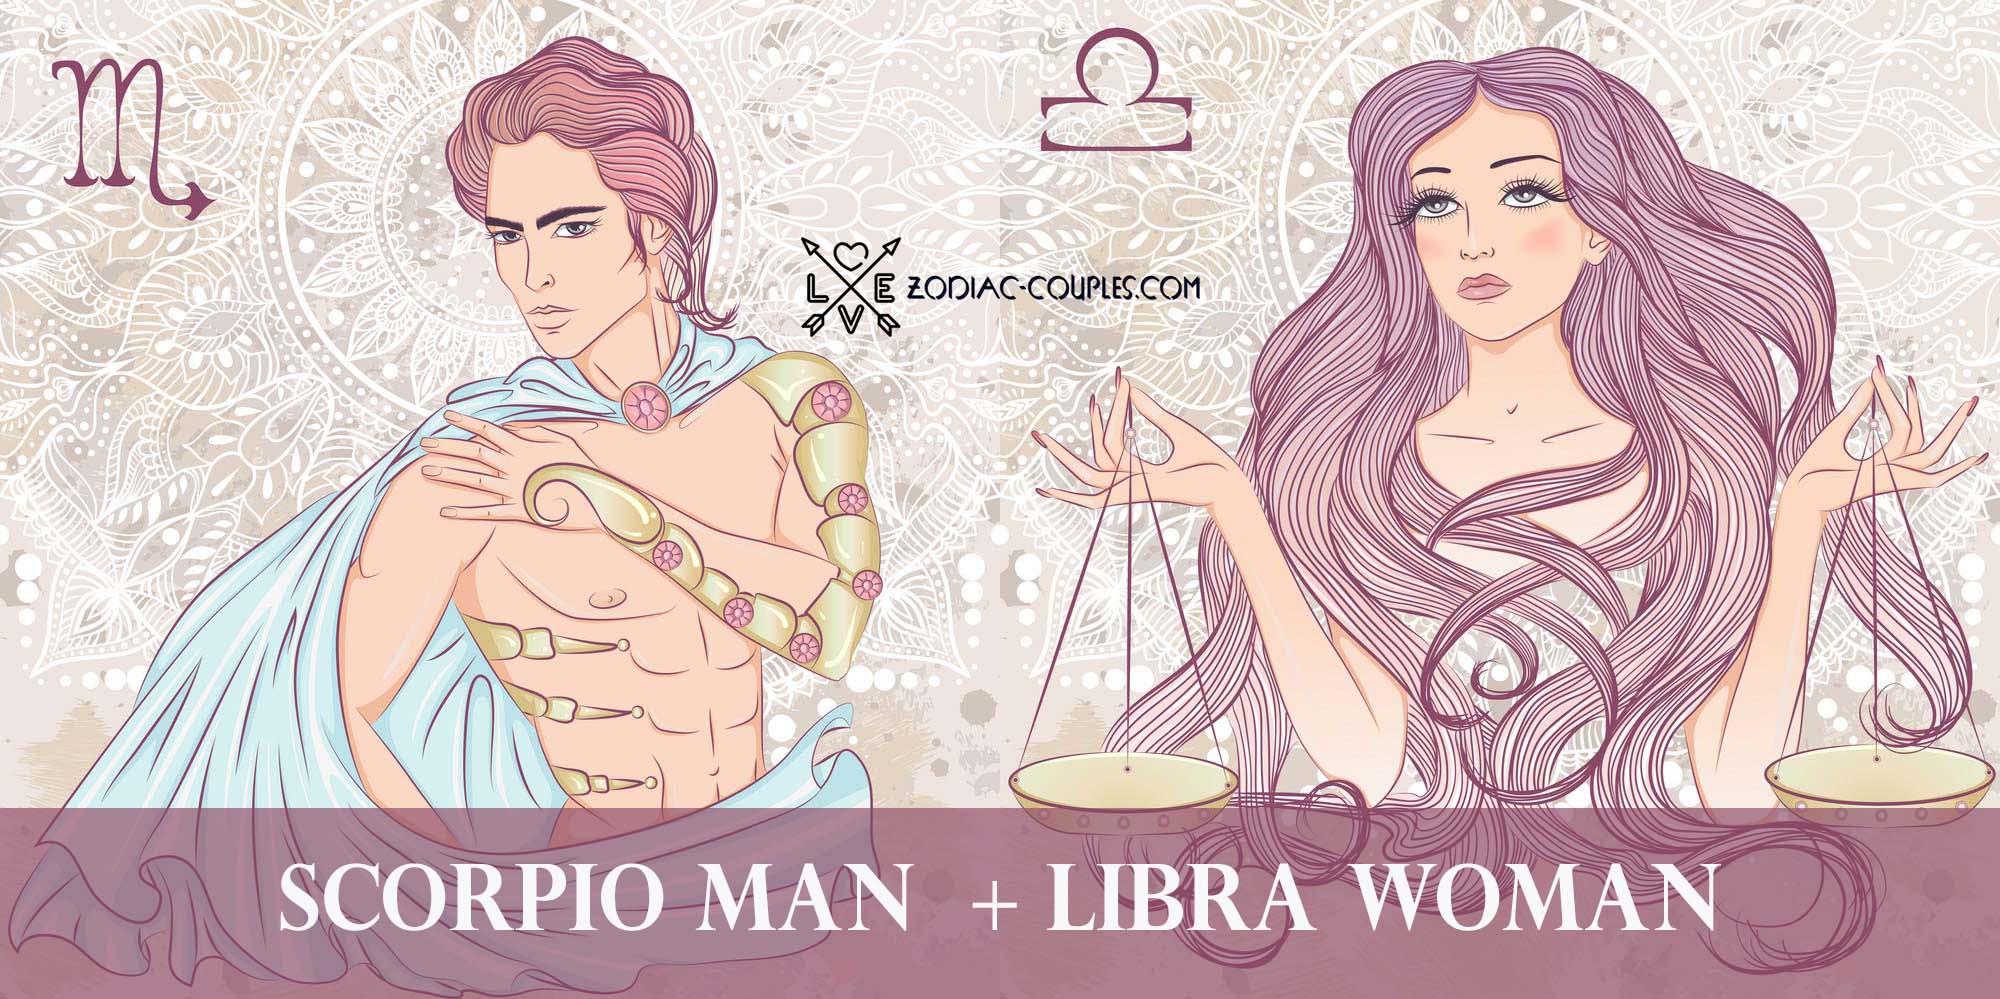 Scorpio man and Libra woman famous couples and compatibility ♏♎ Zodiac Couples